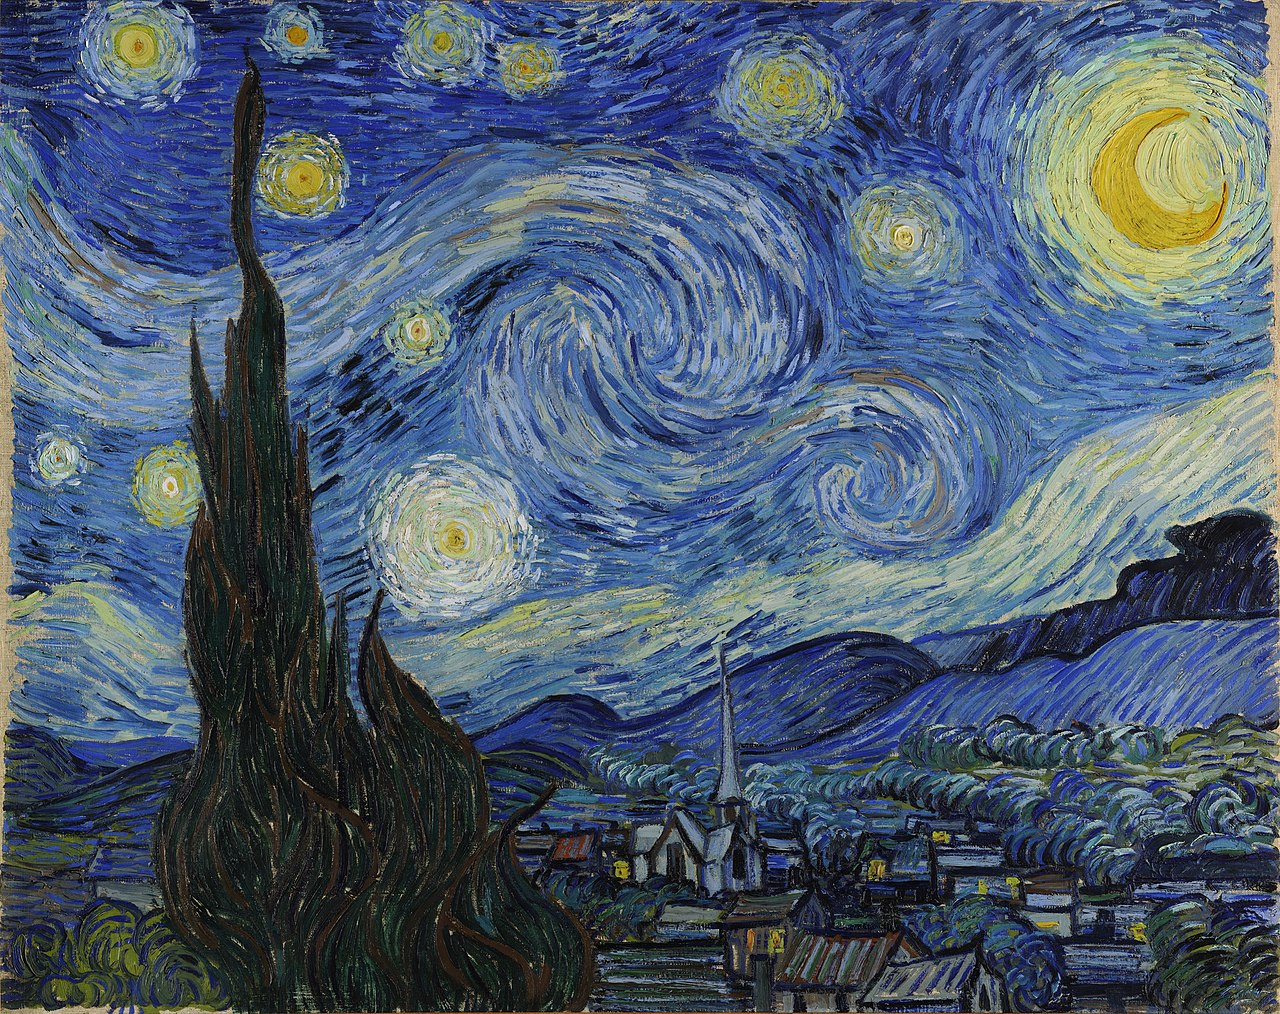 The Starry Night by Vincent van Gogh - 1889 - 73 x 92 cm Museum of Modern Art